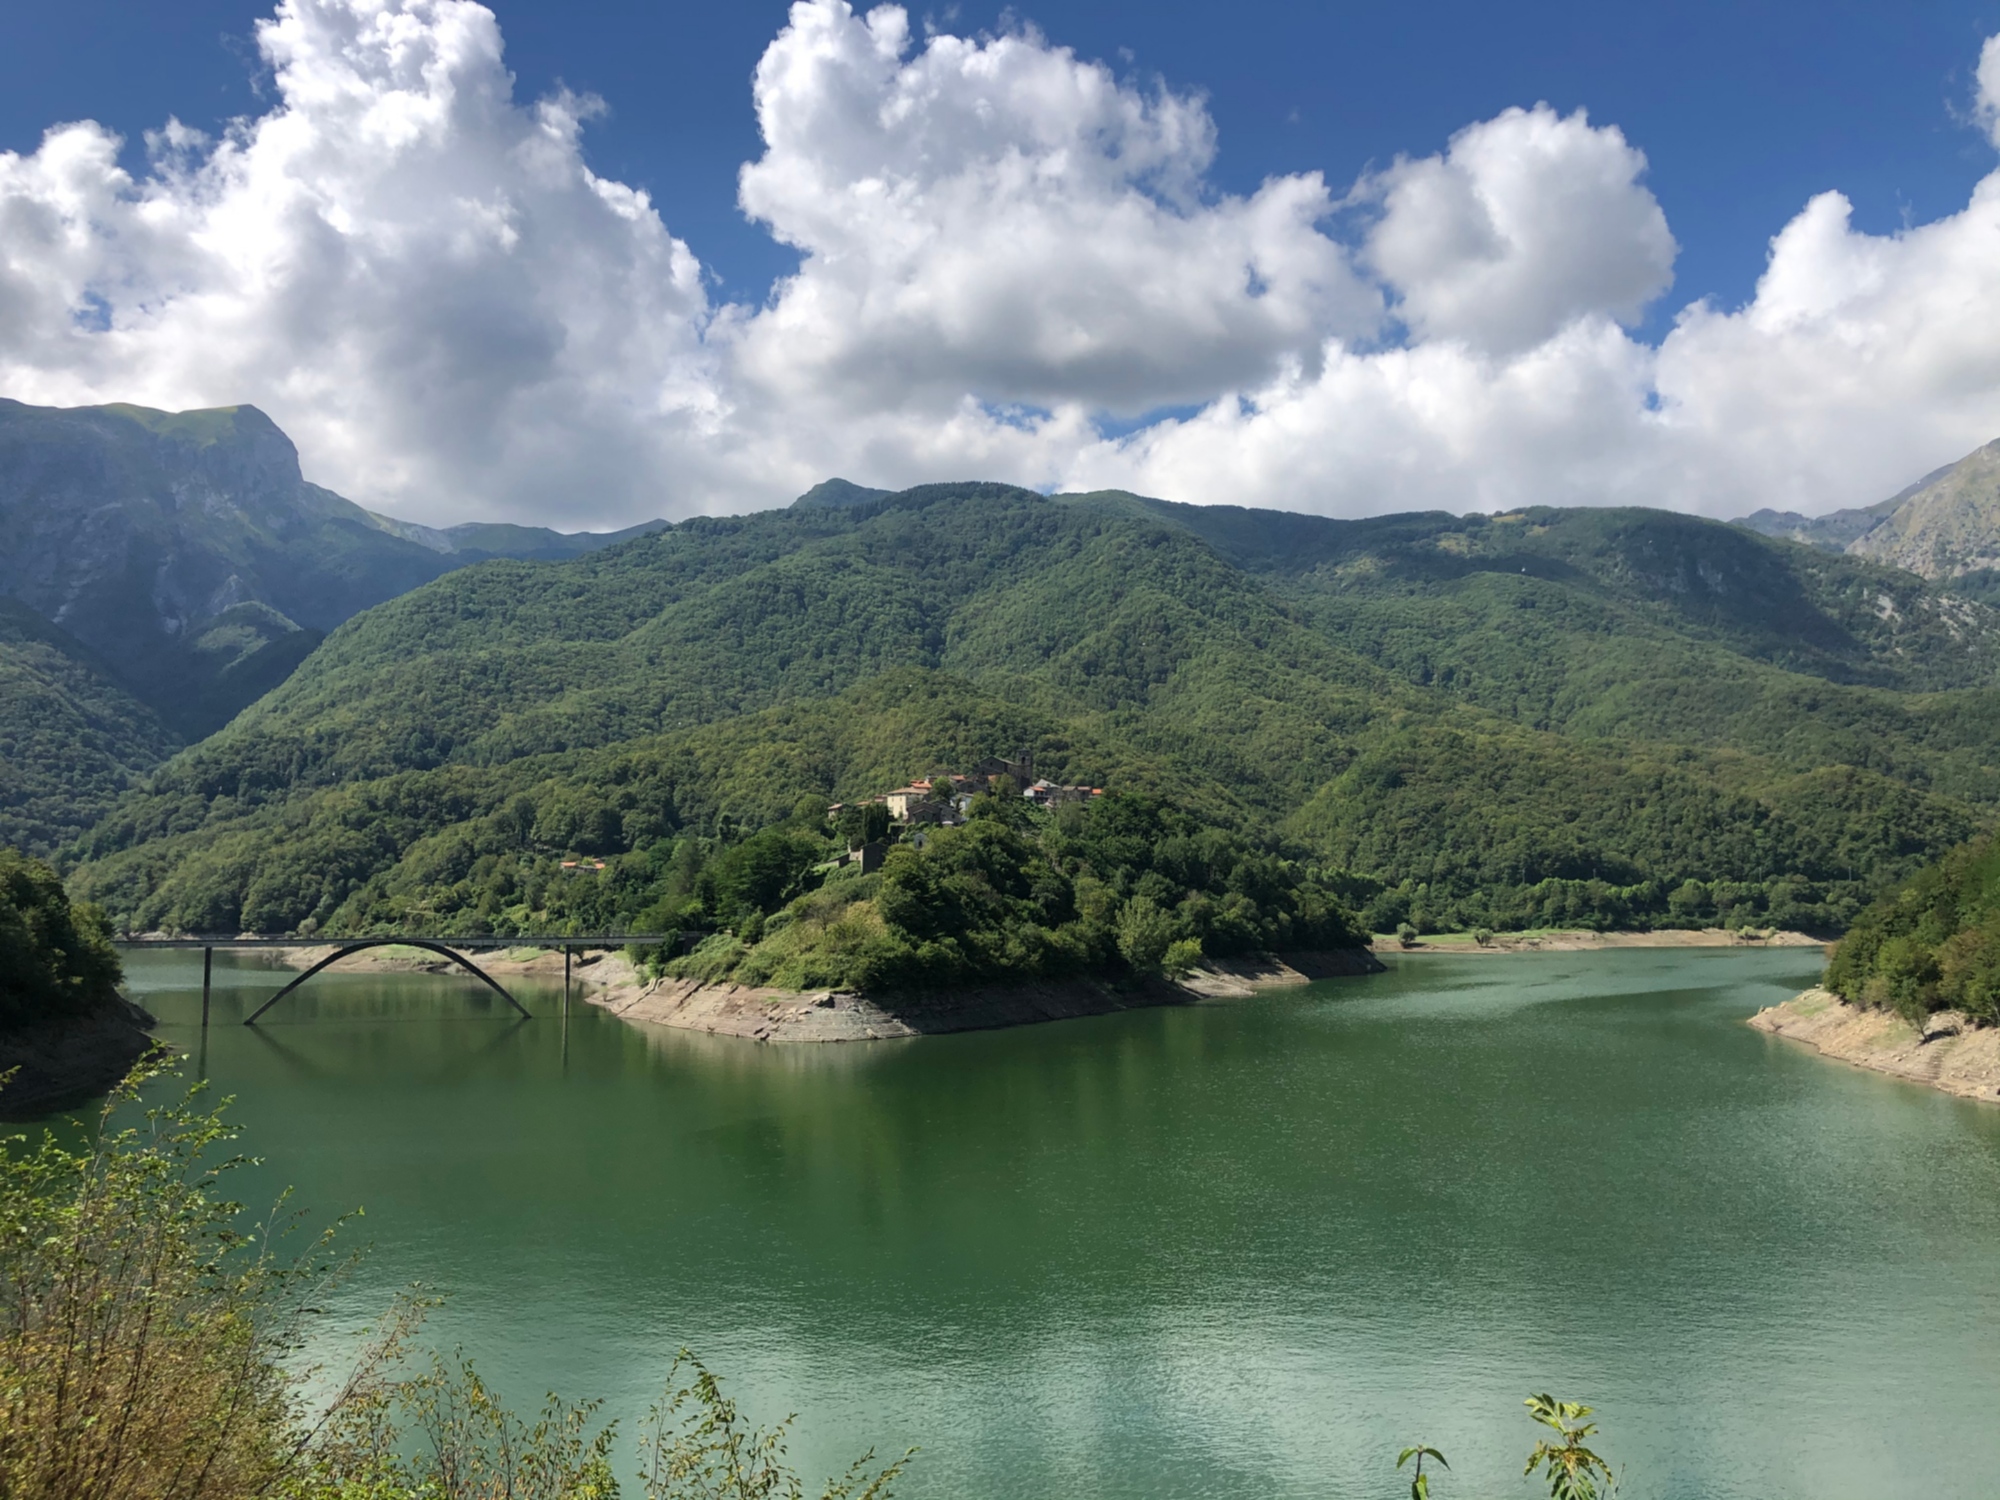 Six days immersed in the Garfagnana countryside Tuscany